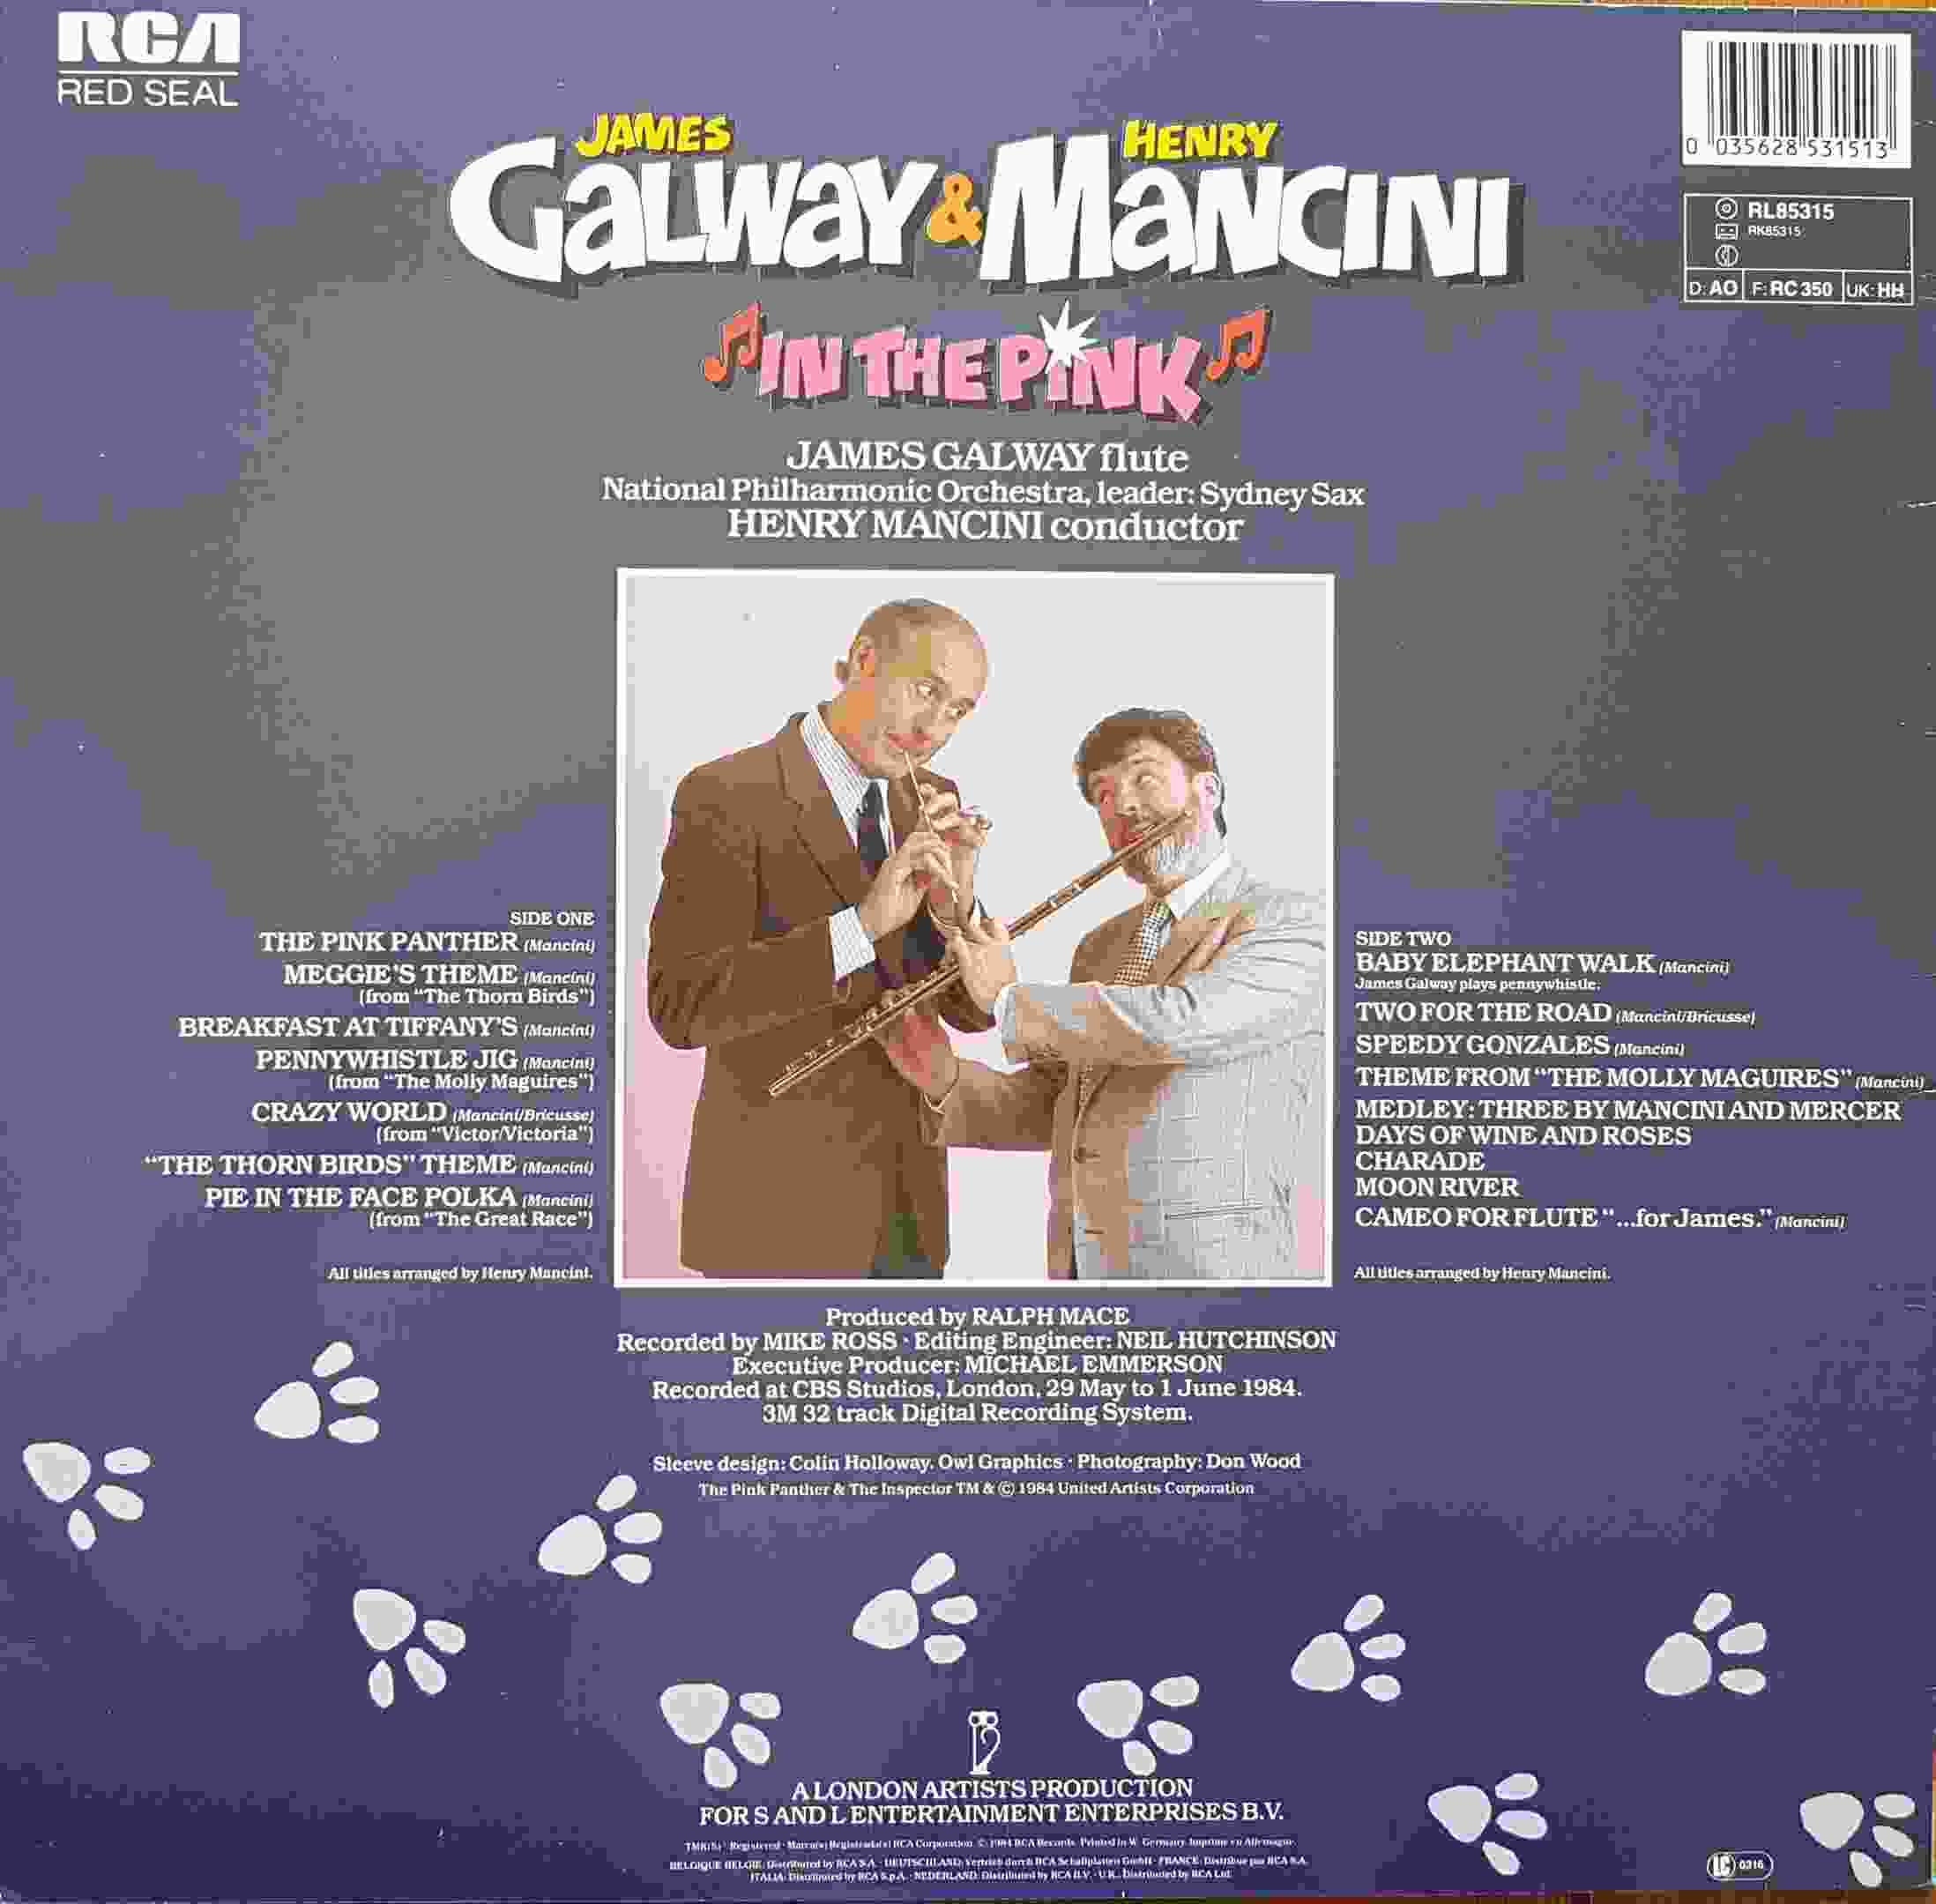 Picture of RL 85315 In the pink by artist Henry Mancini / Bricusse / James Galway from ITV, Channel 4 and Channel 5 library